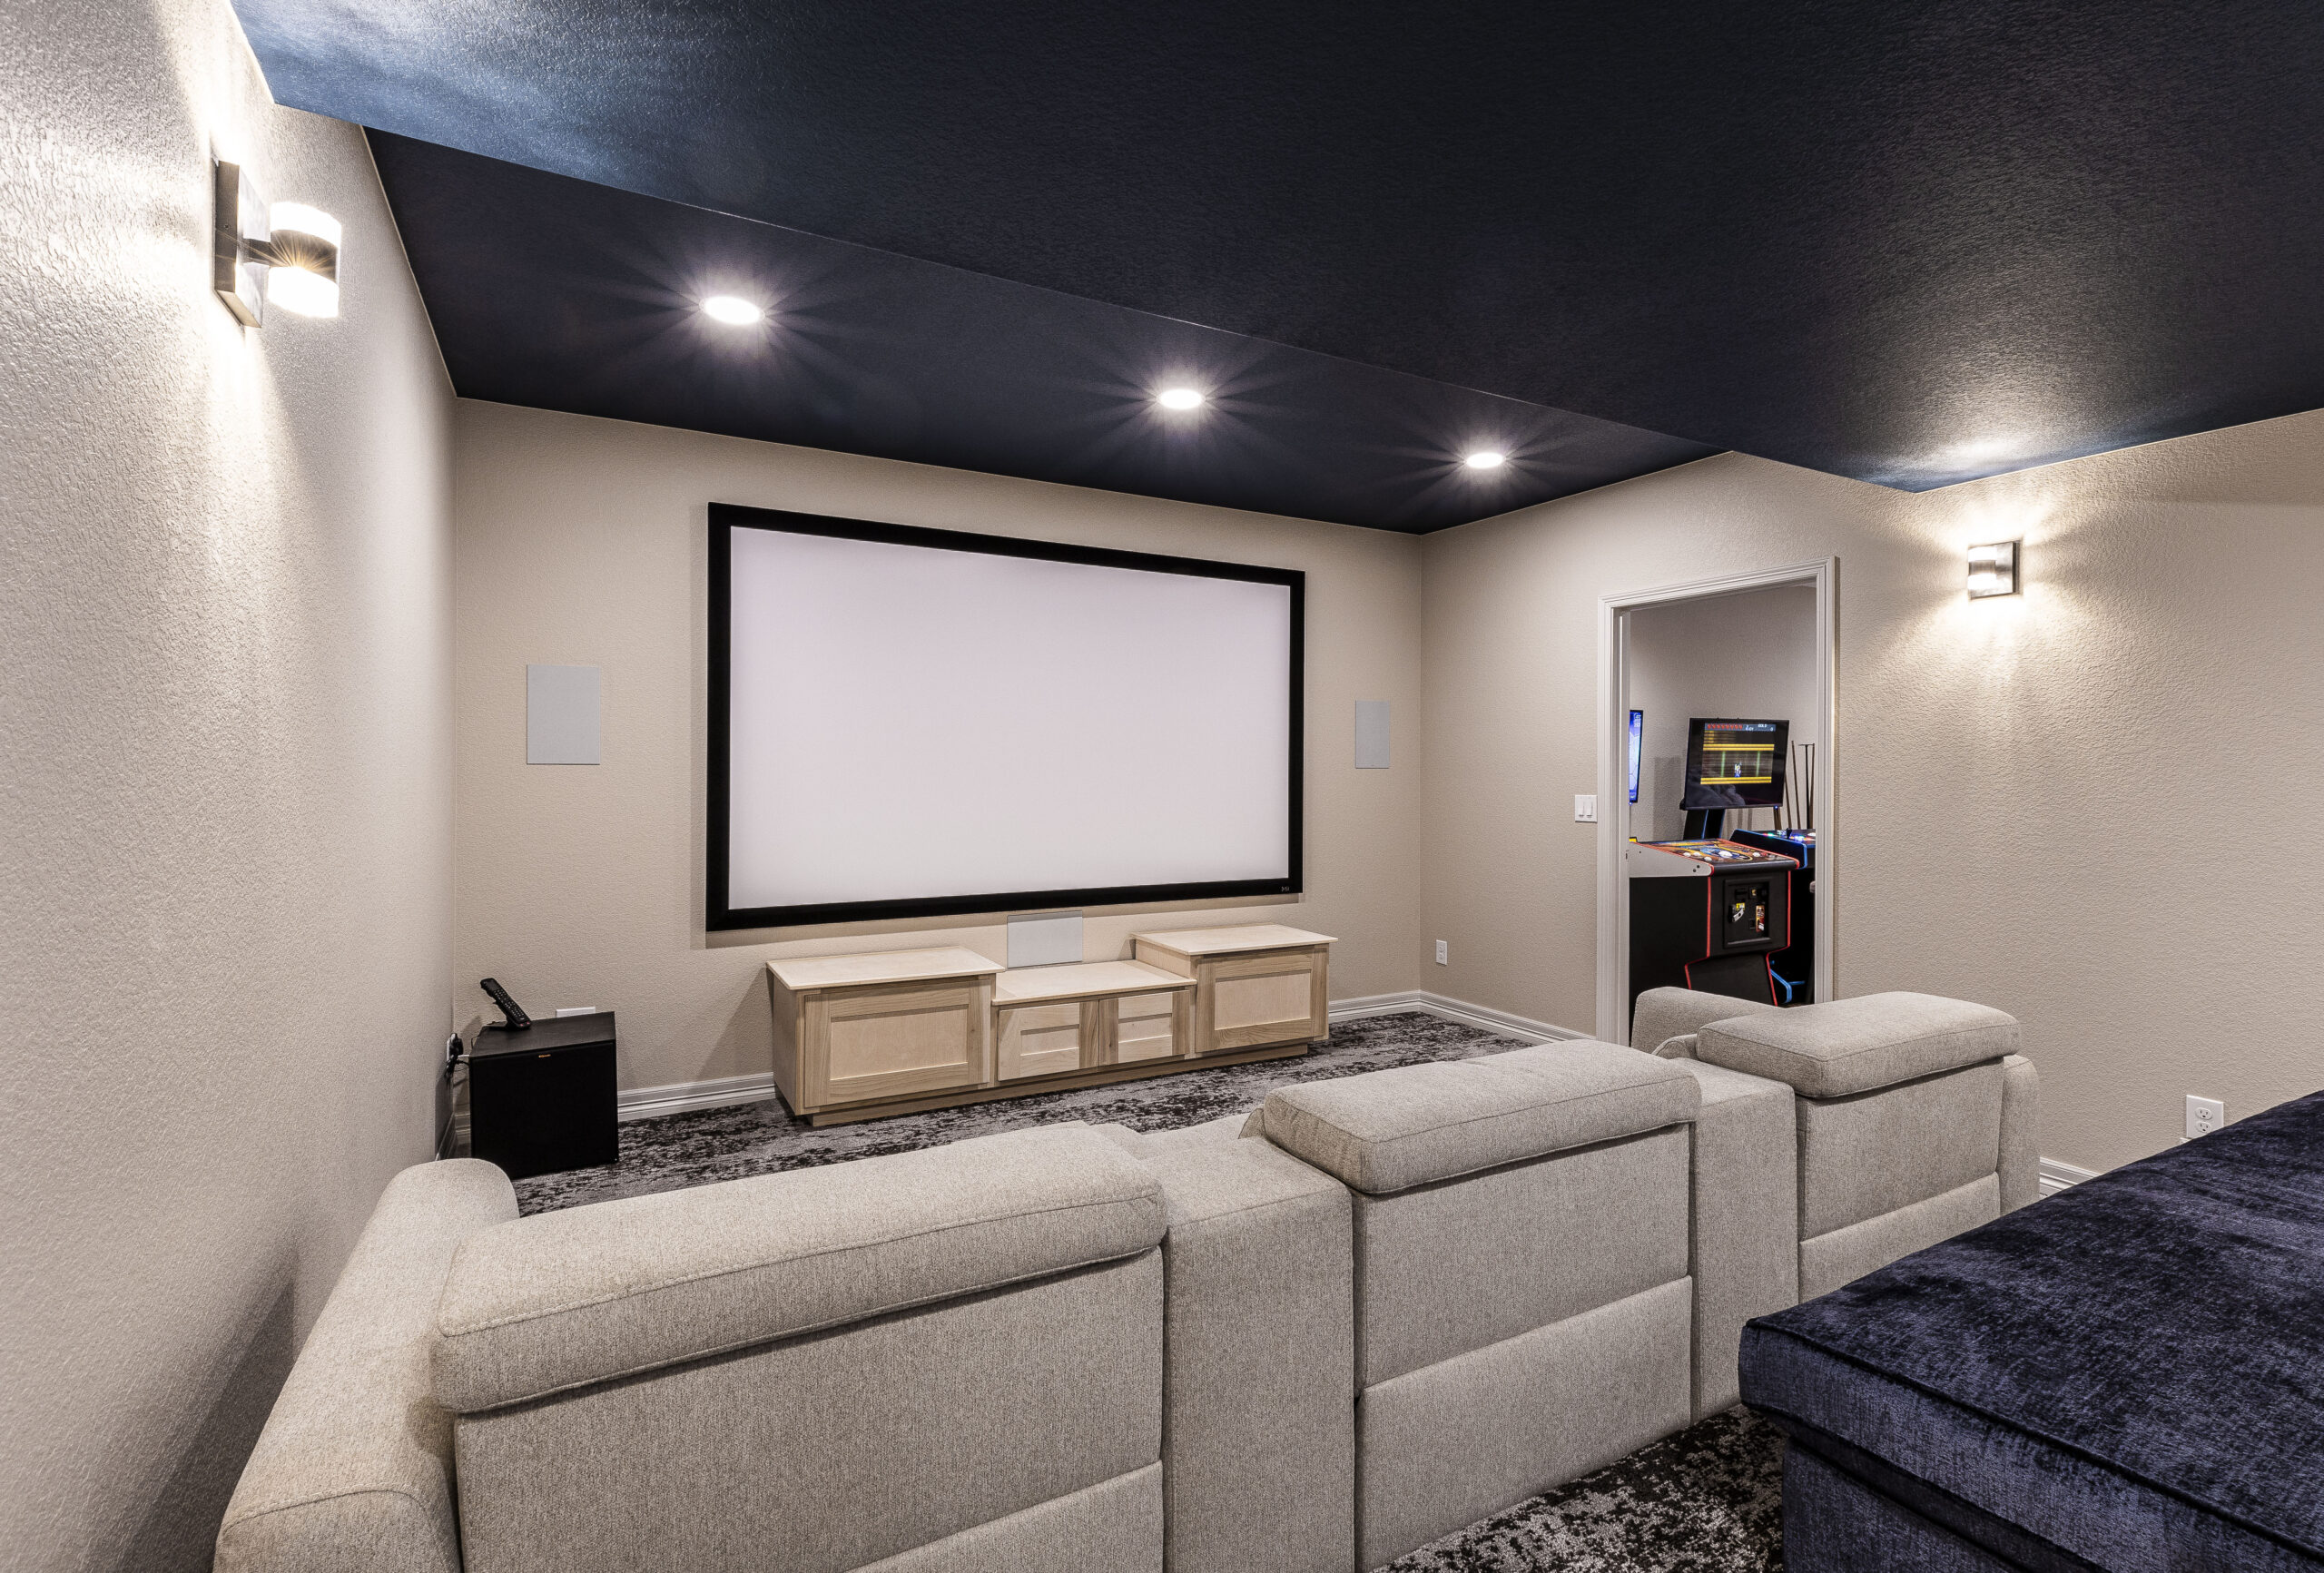 Tips to Finish Your Basement into a Theater